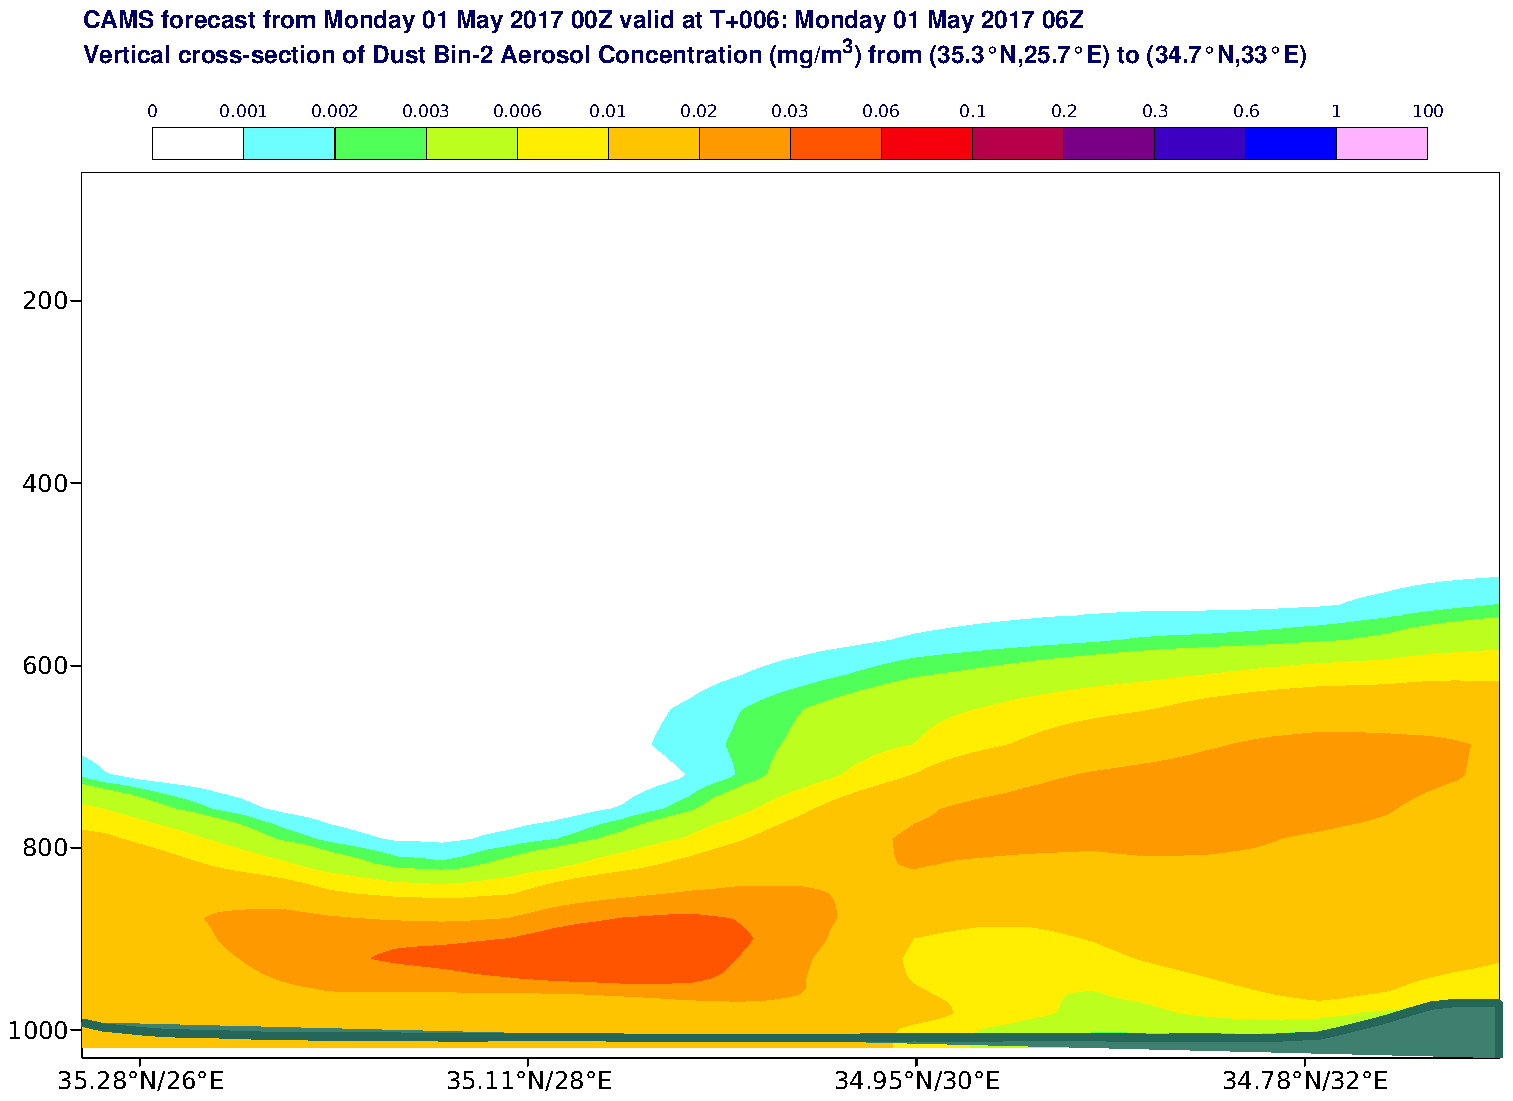 Vertical cross-section of Dust Bin-2 Aerosol Concentration (mg/m3) valid at T6 - 2017-05-01 06:00